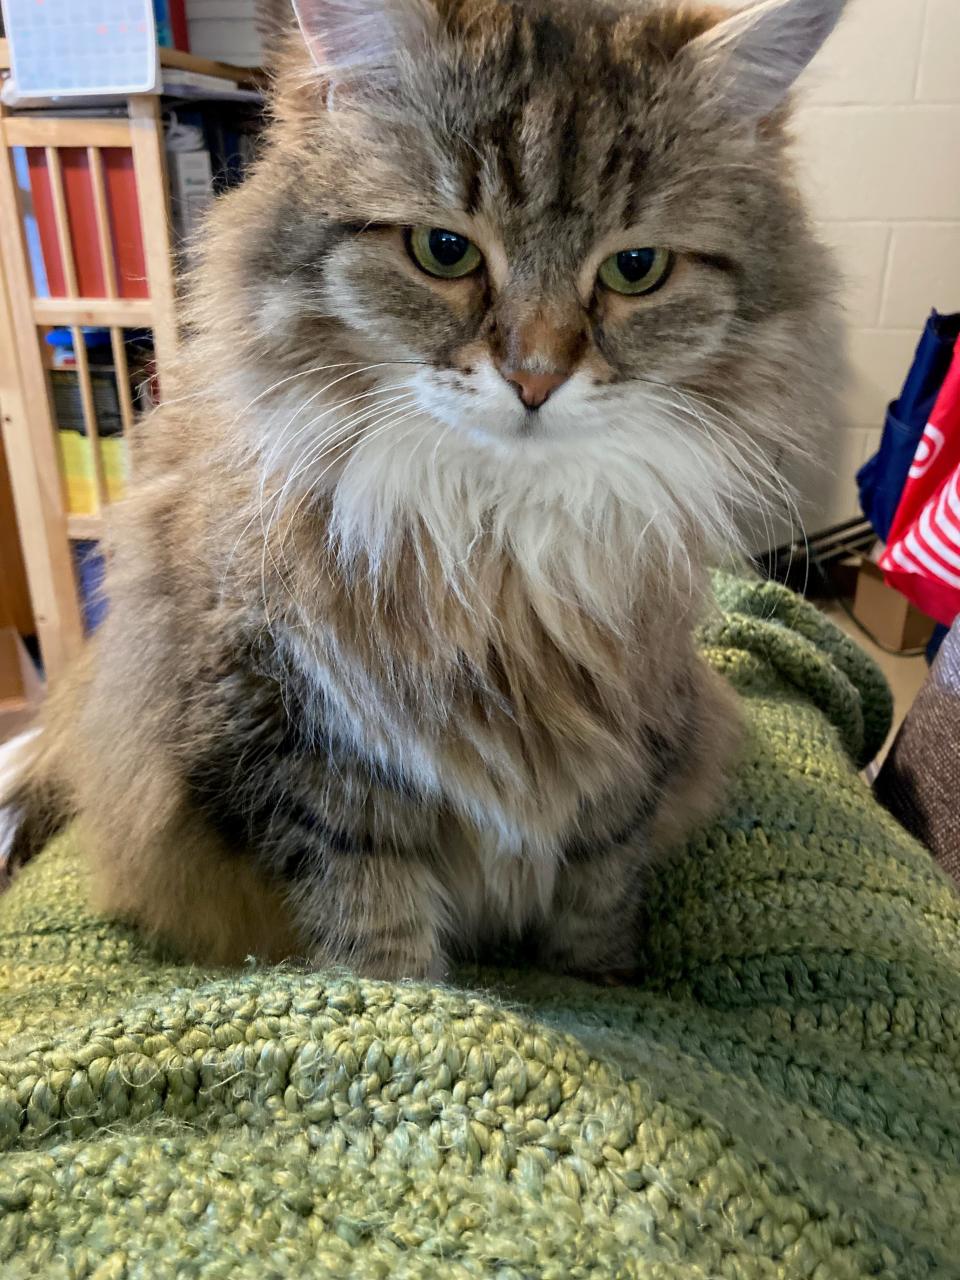 A photo of Sister Diana Doncaster's cat, Motka, who is a Siberian Forest Cat. She shares a similar name to Baby Motka. Doncaster says her cat's full name is 'Her Royal Furryness, Motka the Wise of Wintermist, Princess of Tails.'